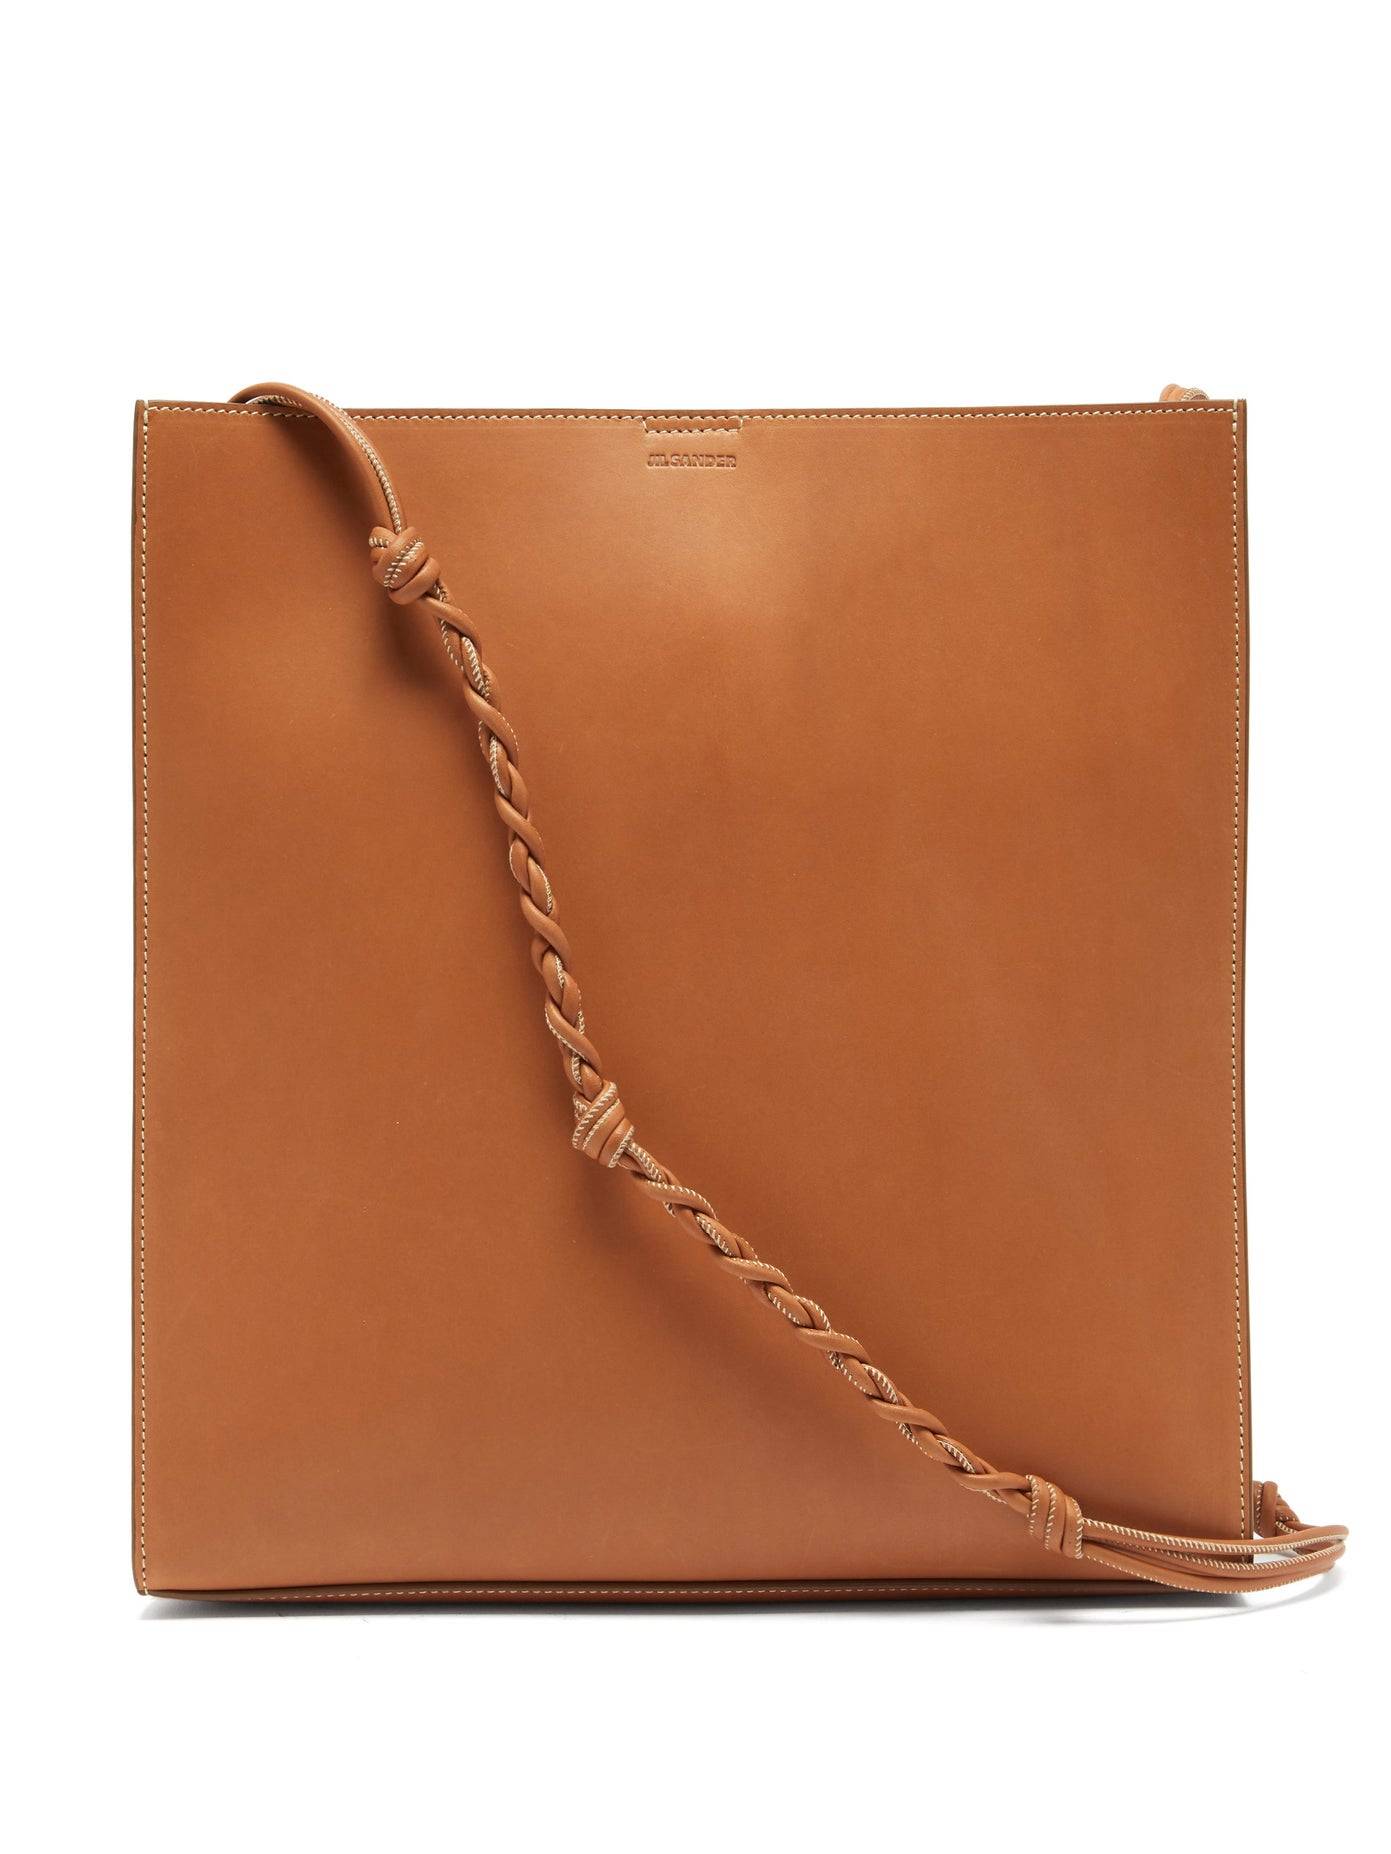 Tangle braided-strap leather tote bag $10,115